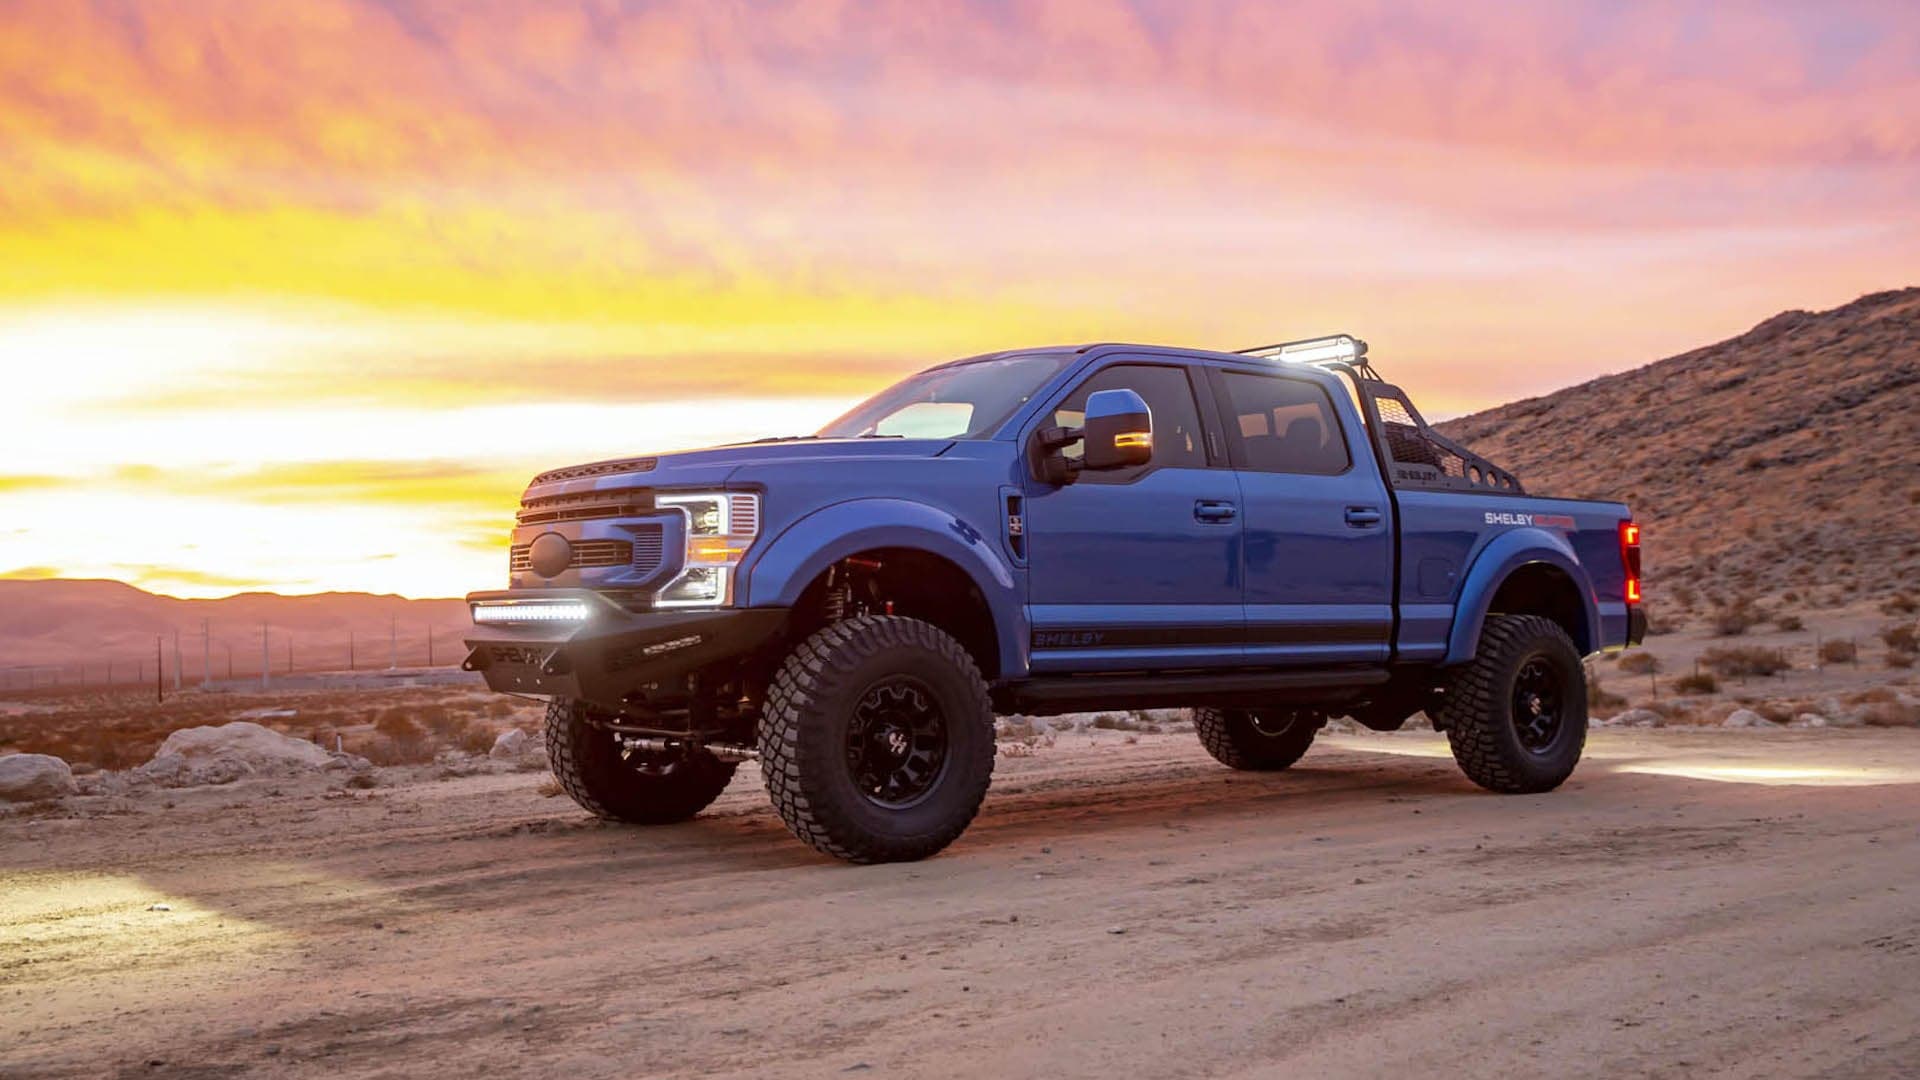 2021 Shelby F-250 Super Baja: Almost the Super Duty Raptor You’ve Been Waiting For